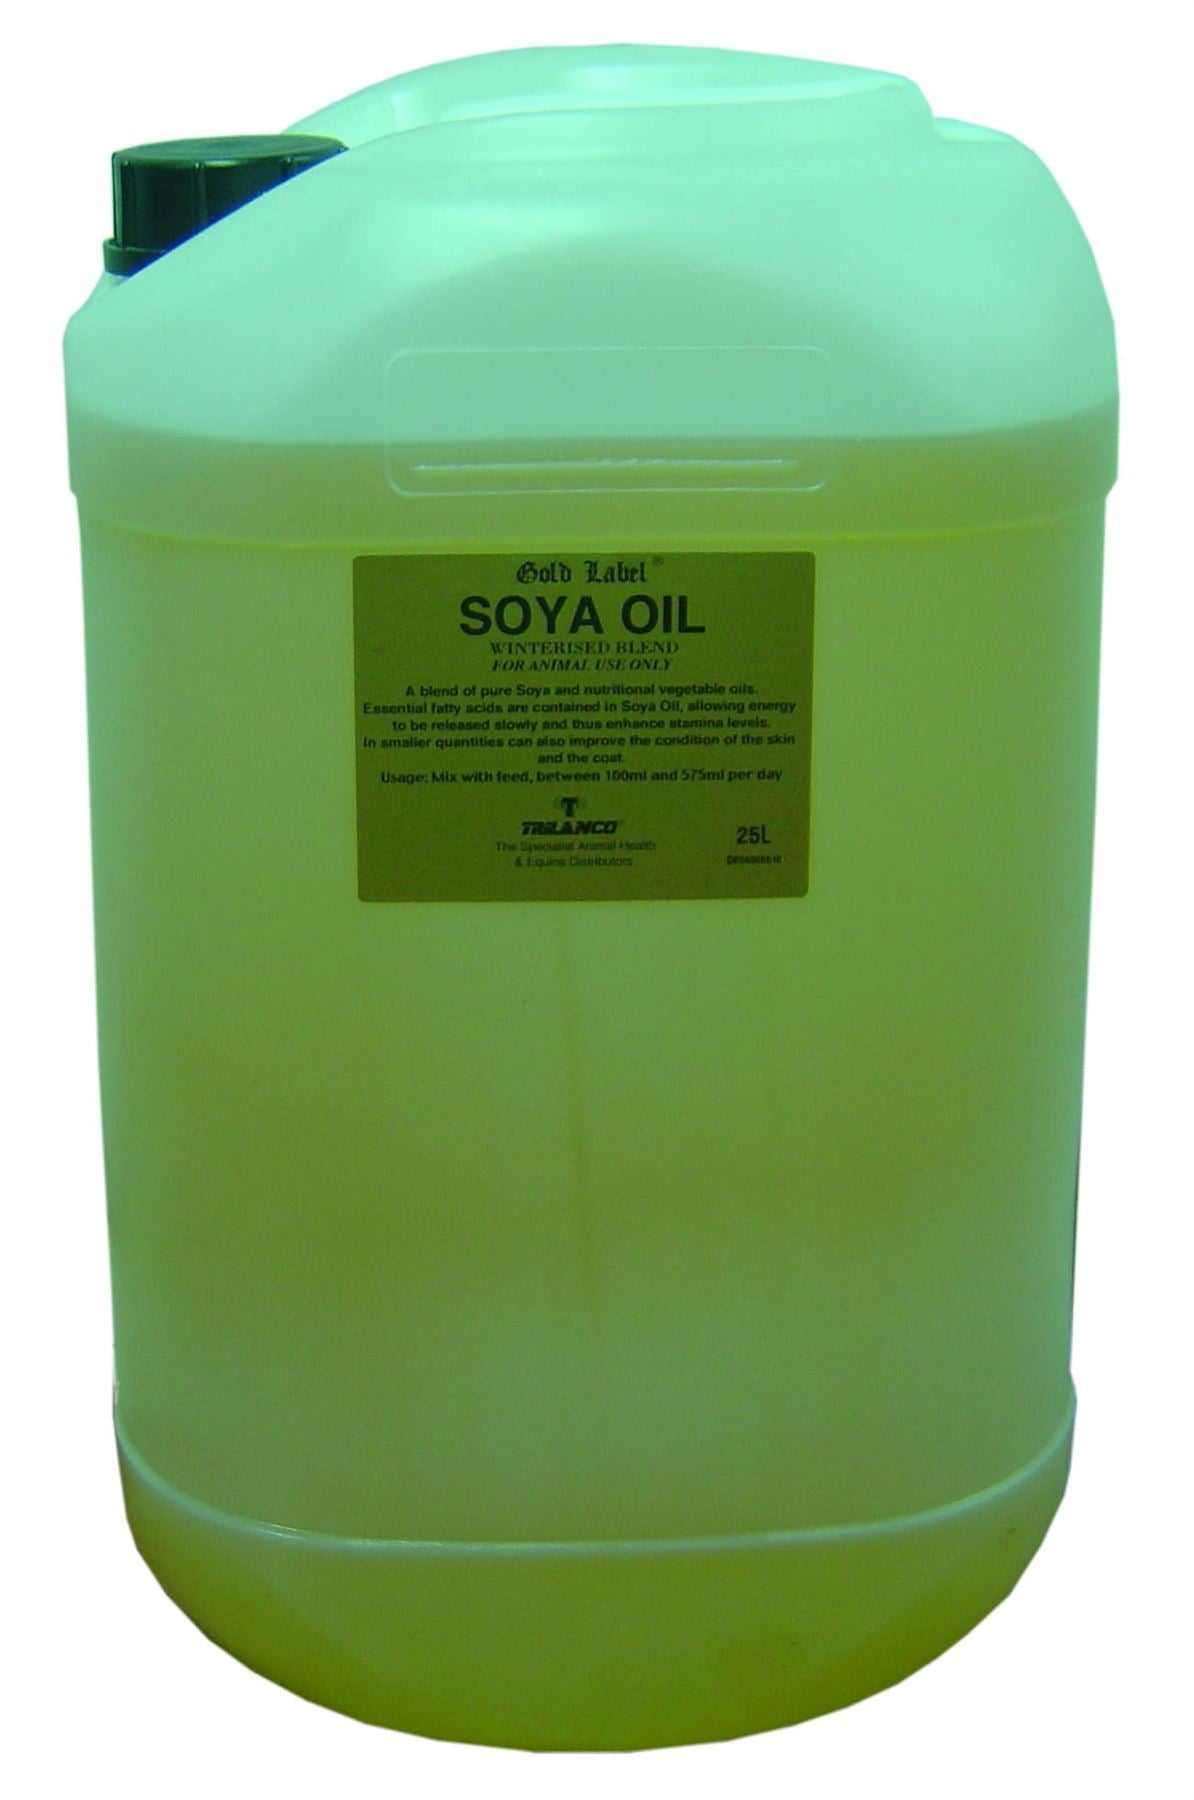 Gold Label Soya Oil - Just Horse Riders